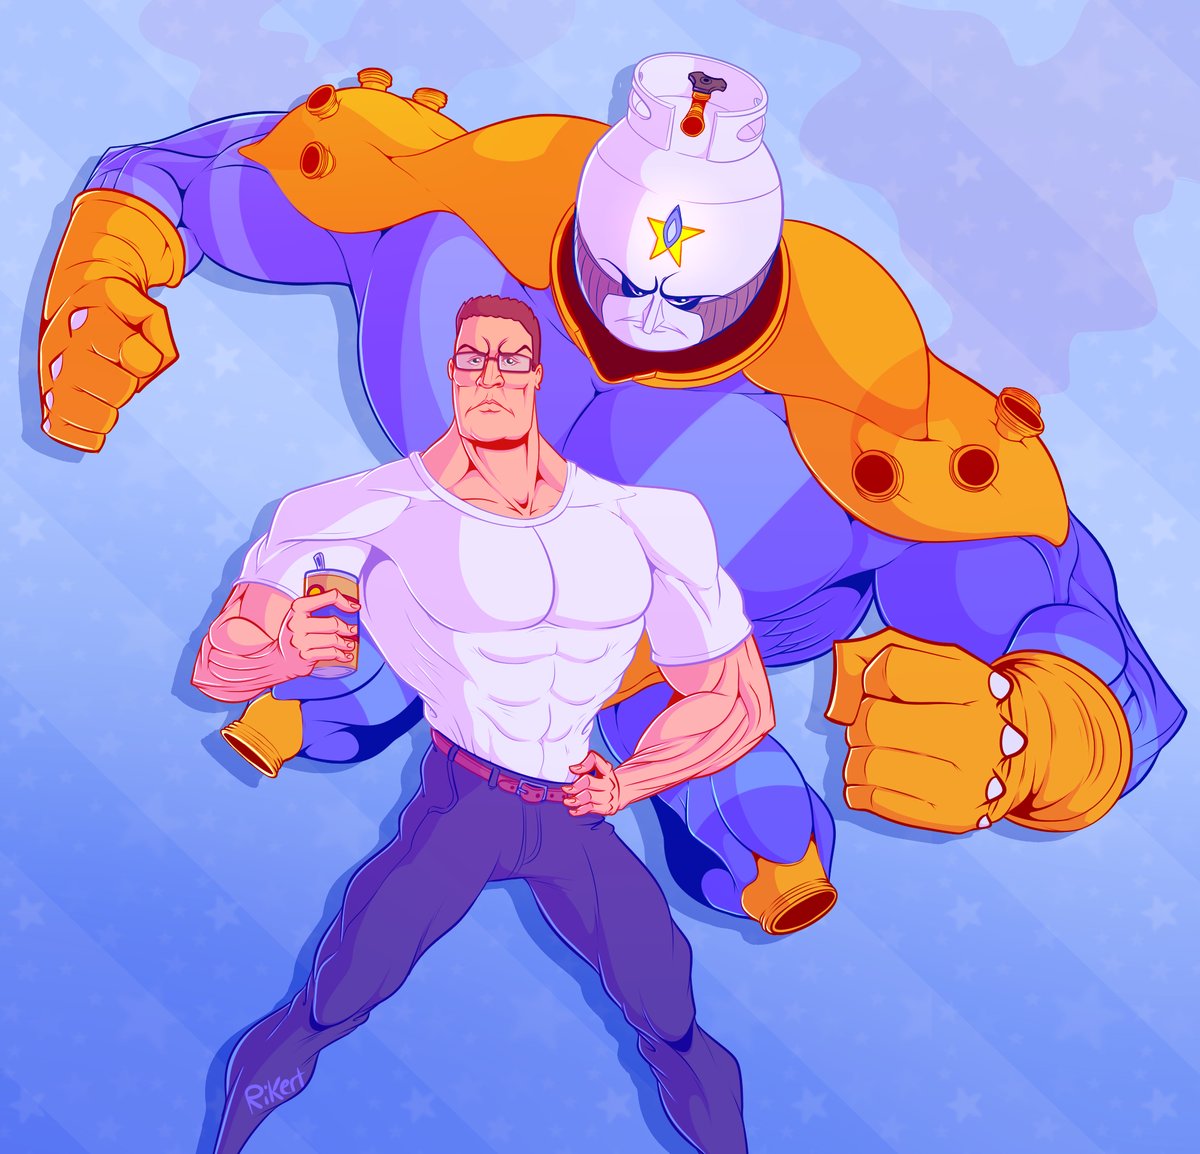 Propane Nightmare is a Close-Range stand with similar stature to the user, Hank...